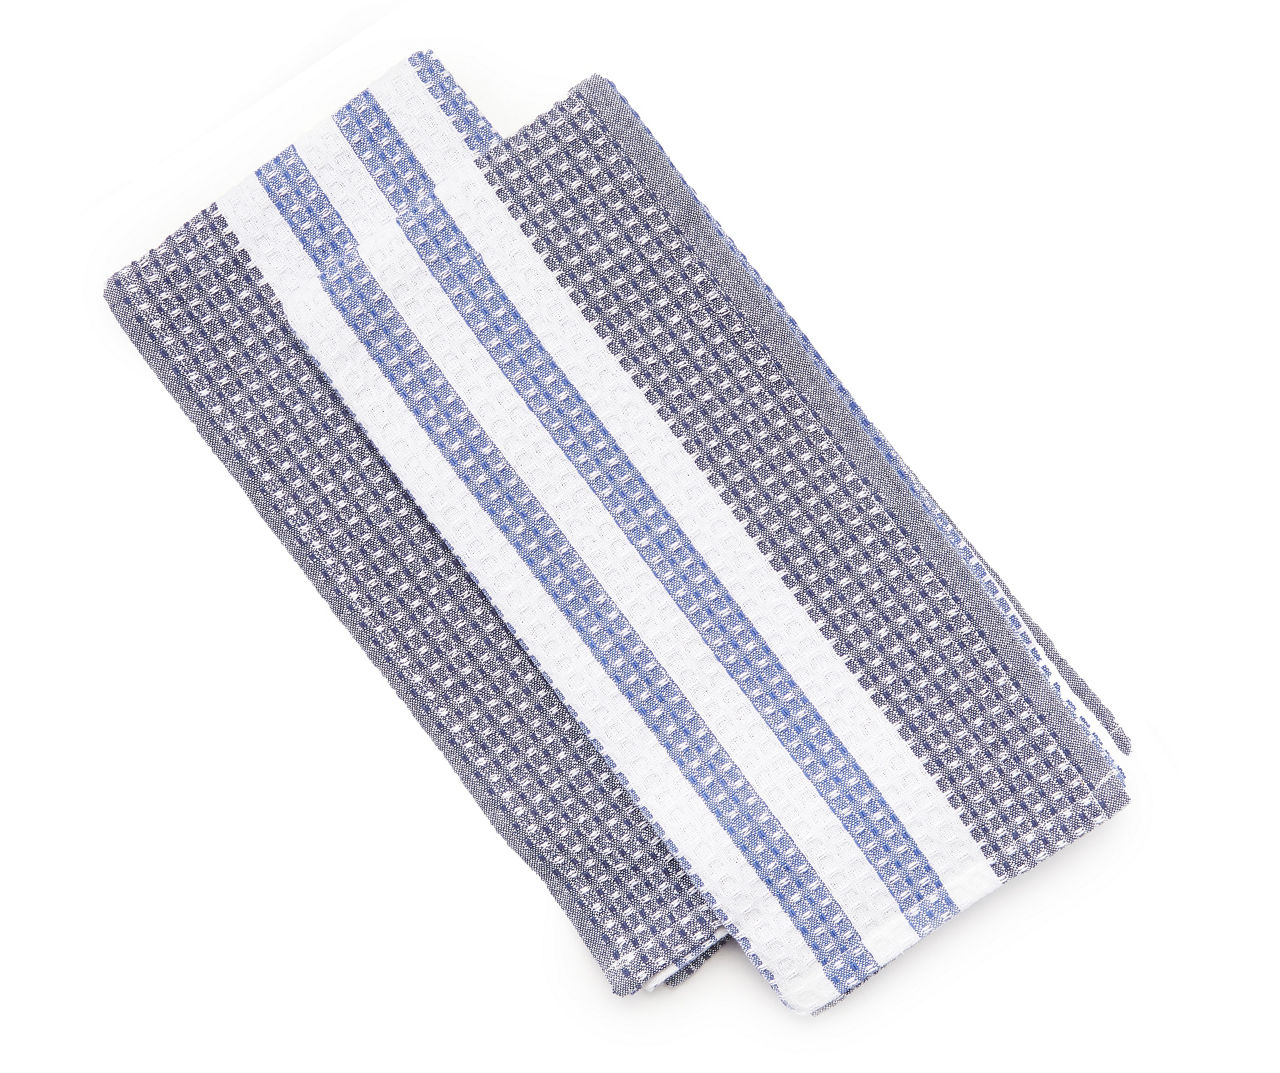 Waffle Weave Cloth (2-Pack)